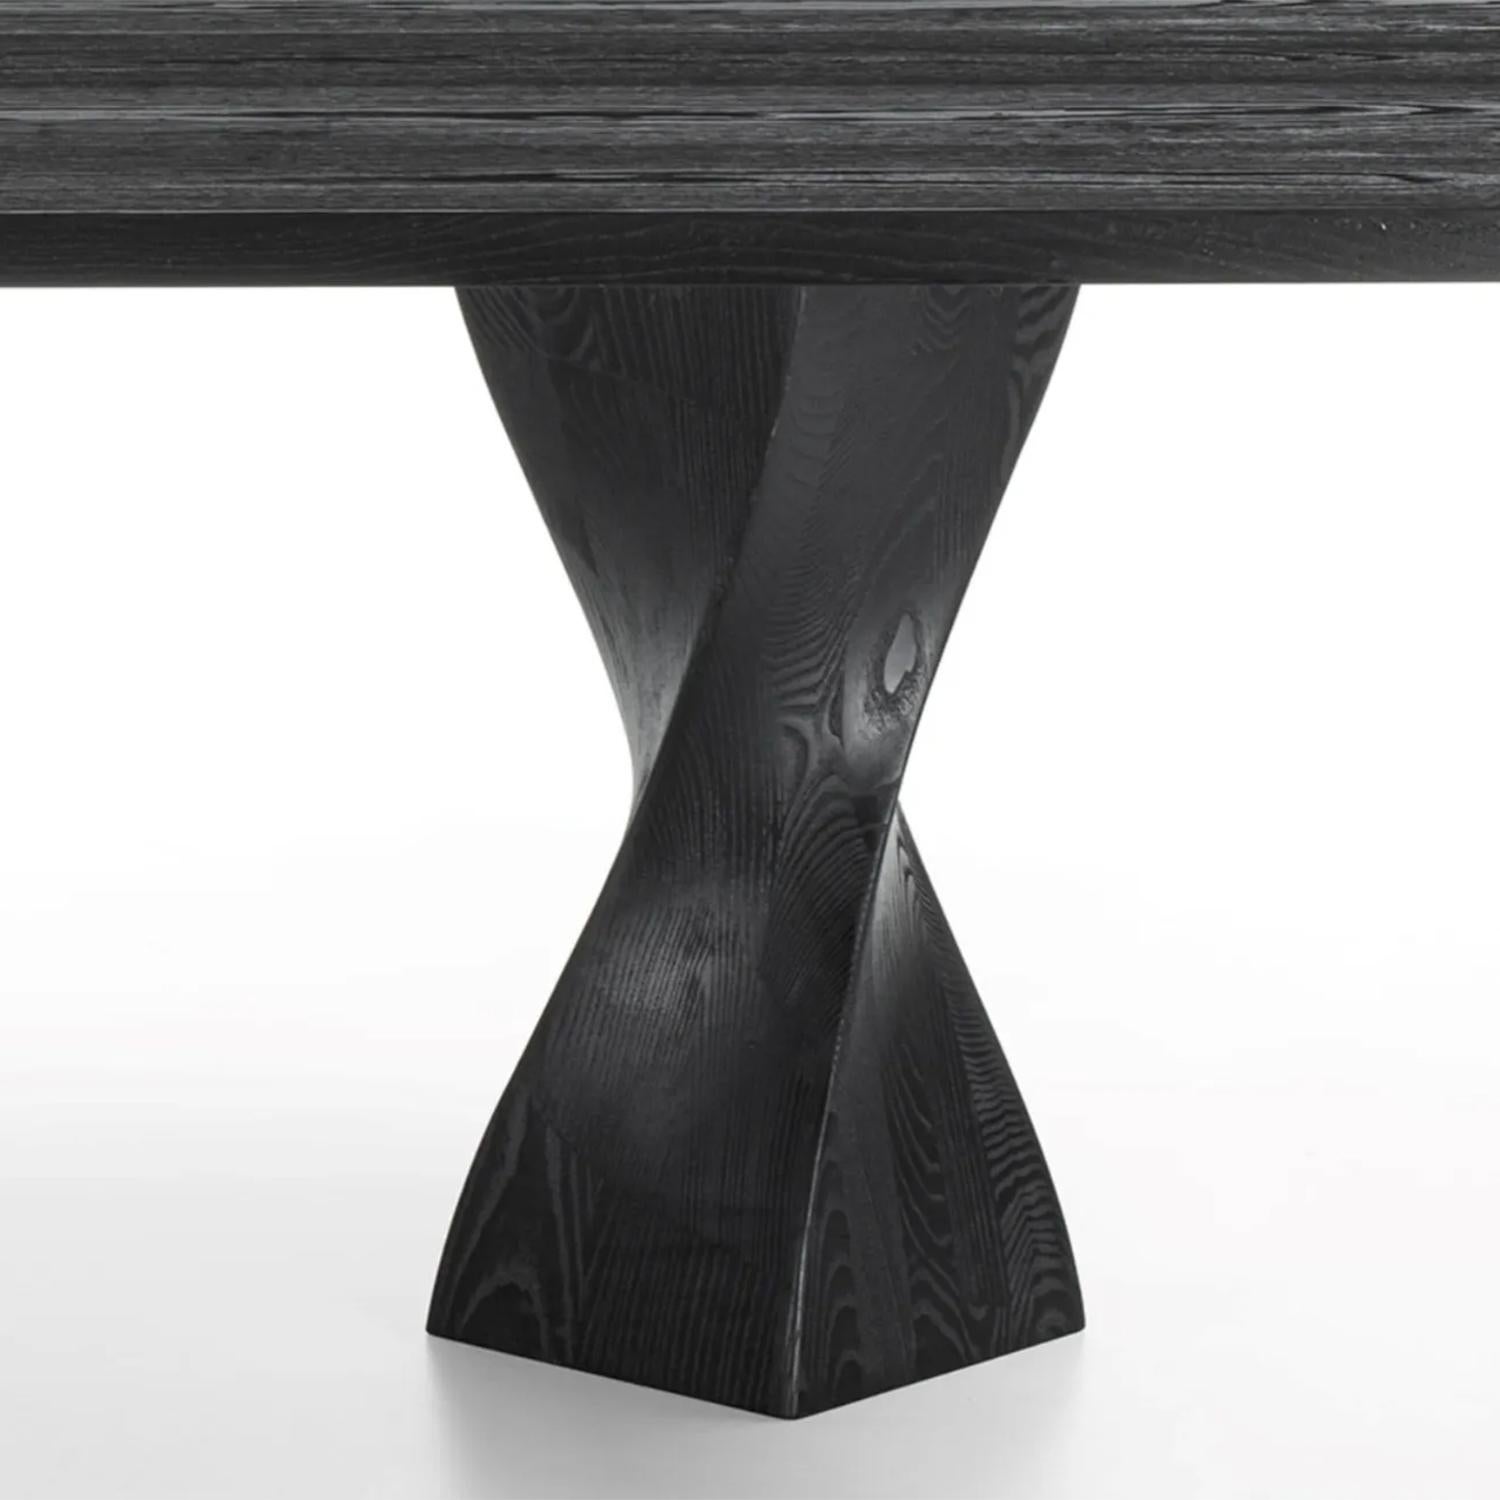 Contemporary Torsade Black Dining Table For Sale